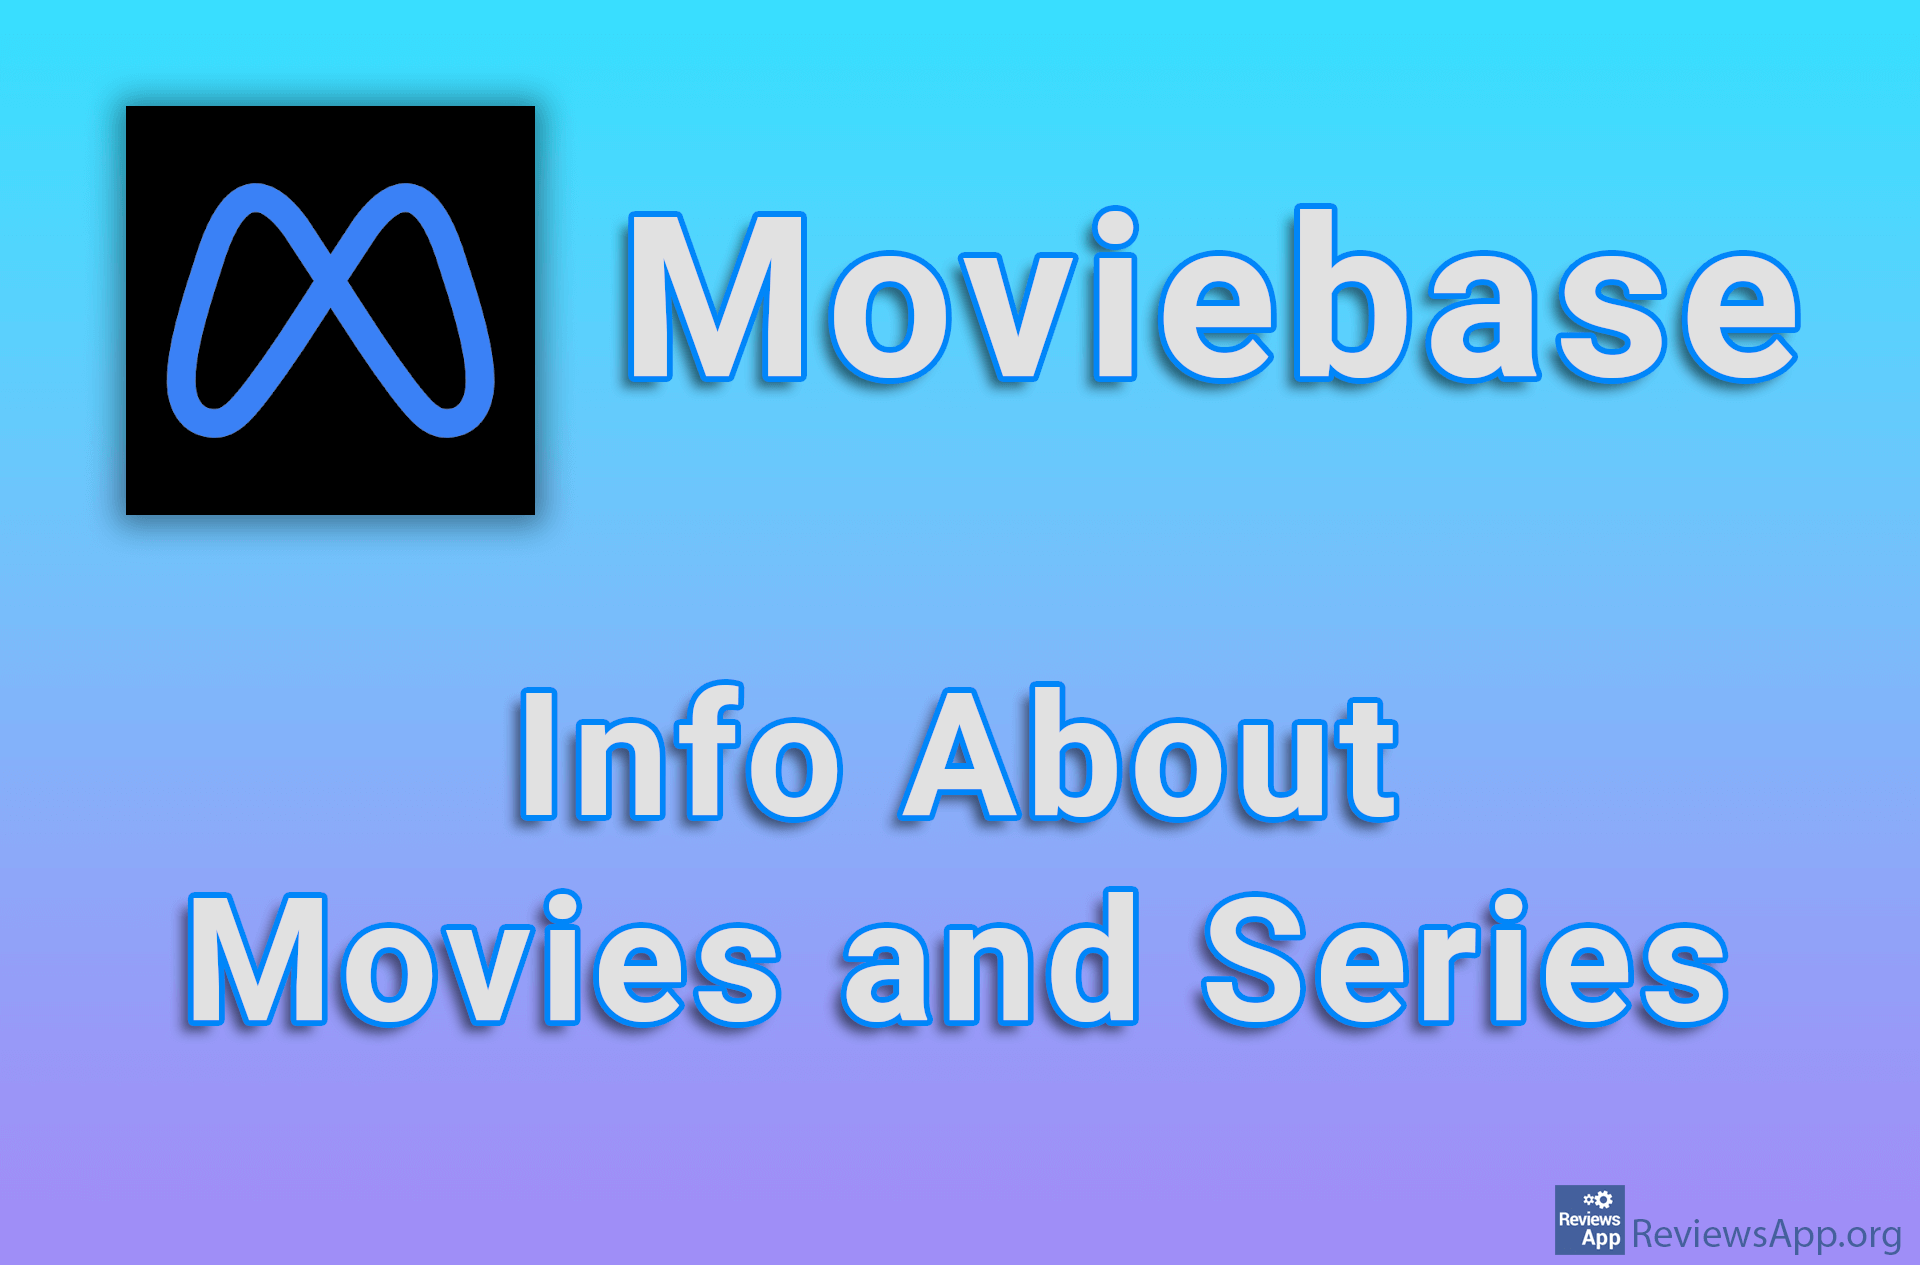 Moviebase – Info About Movies and Series